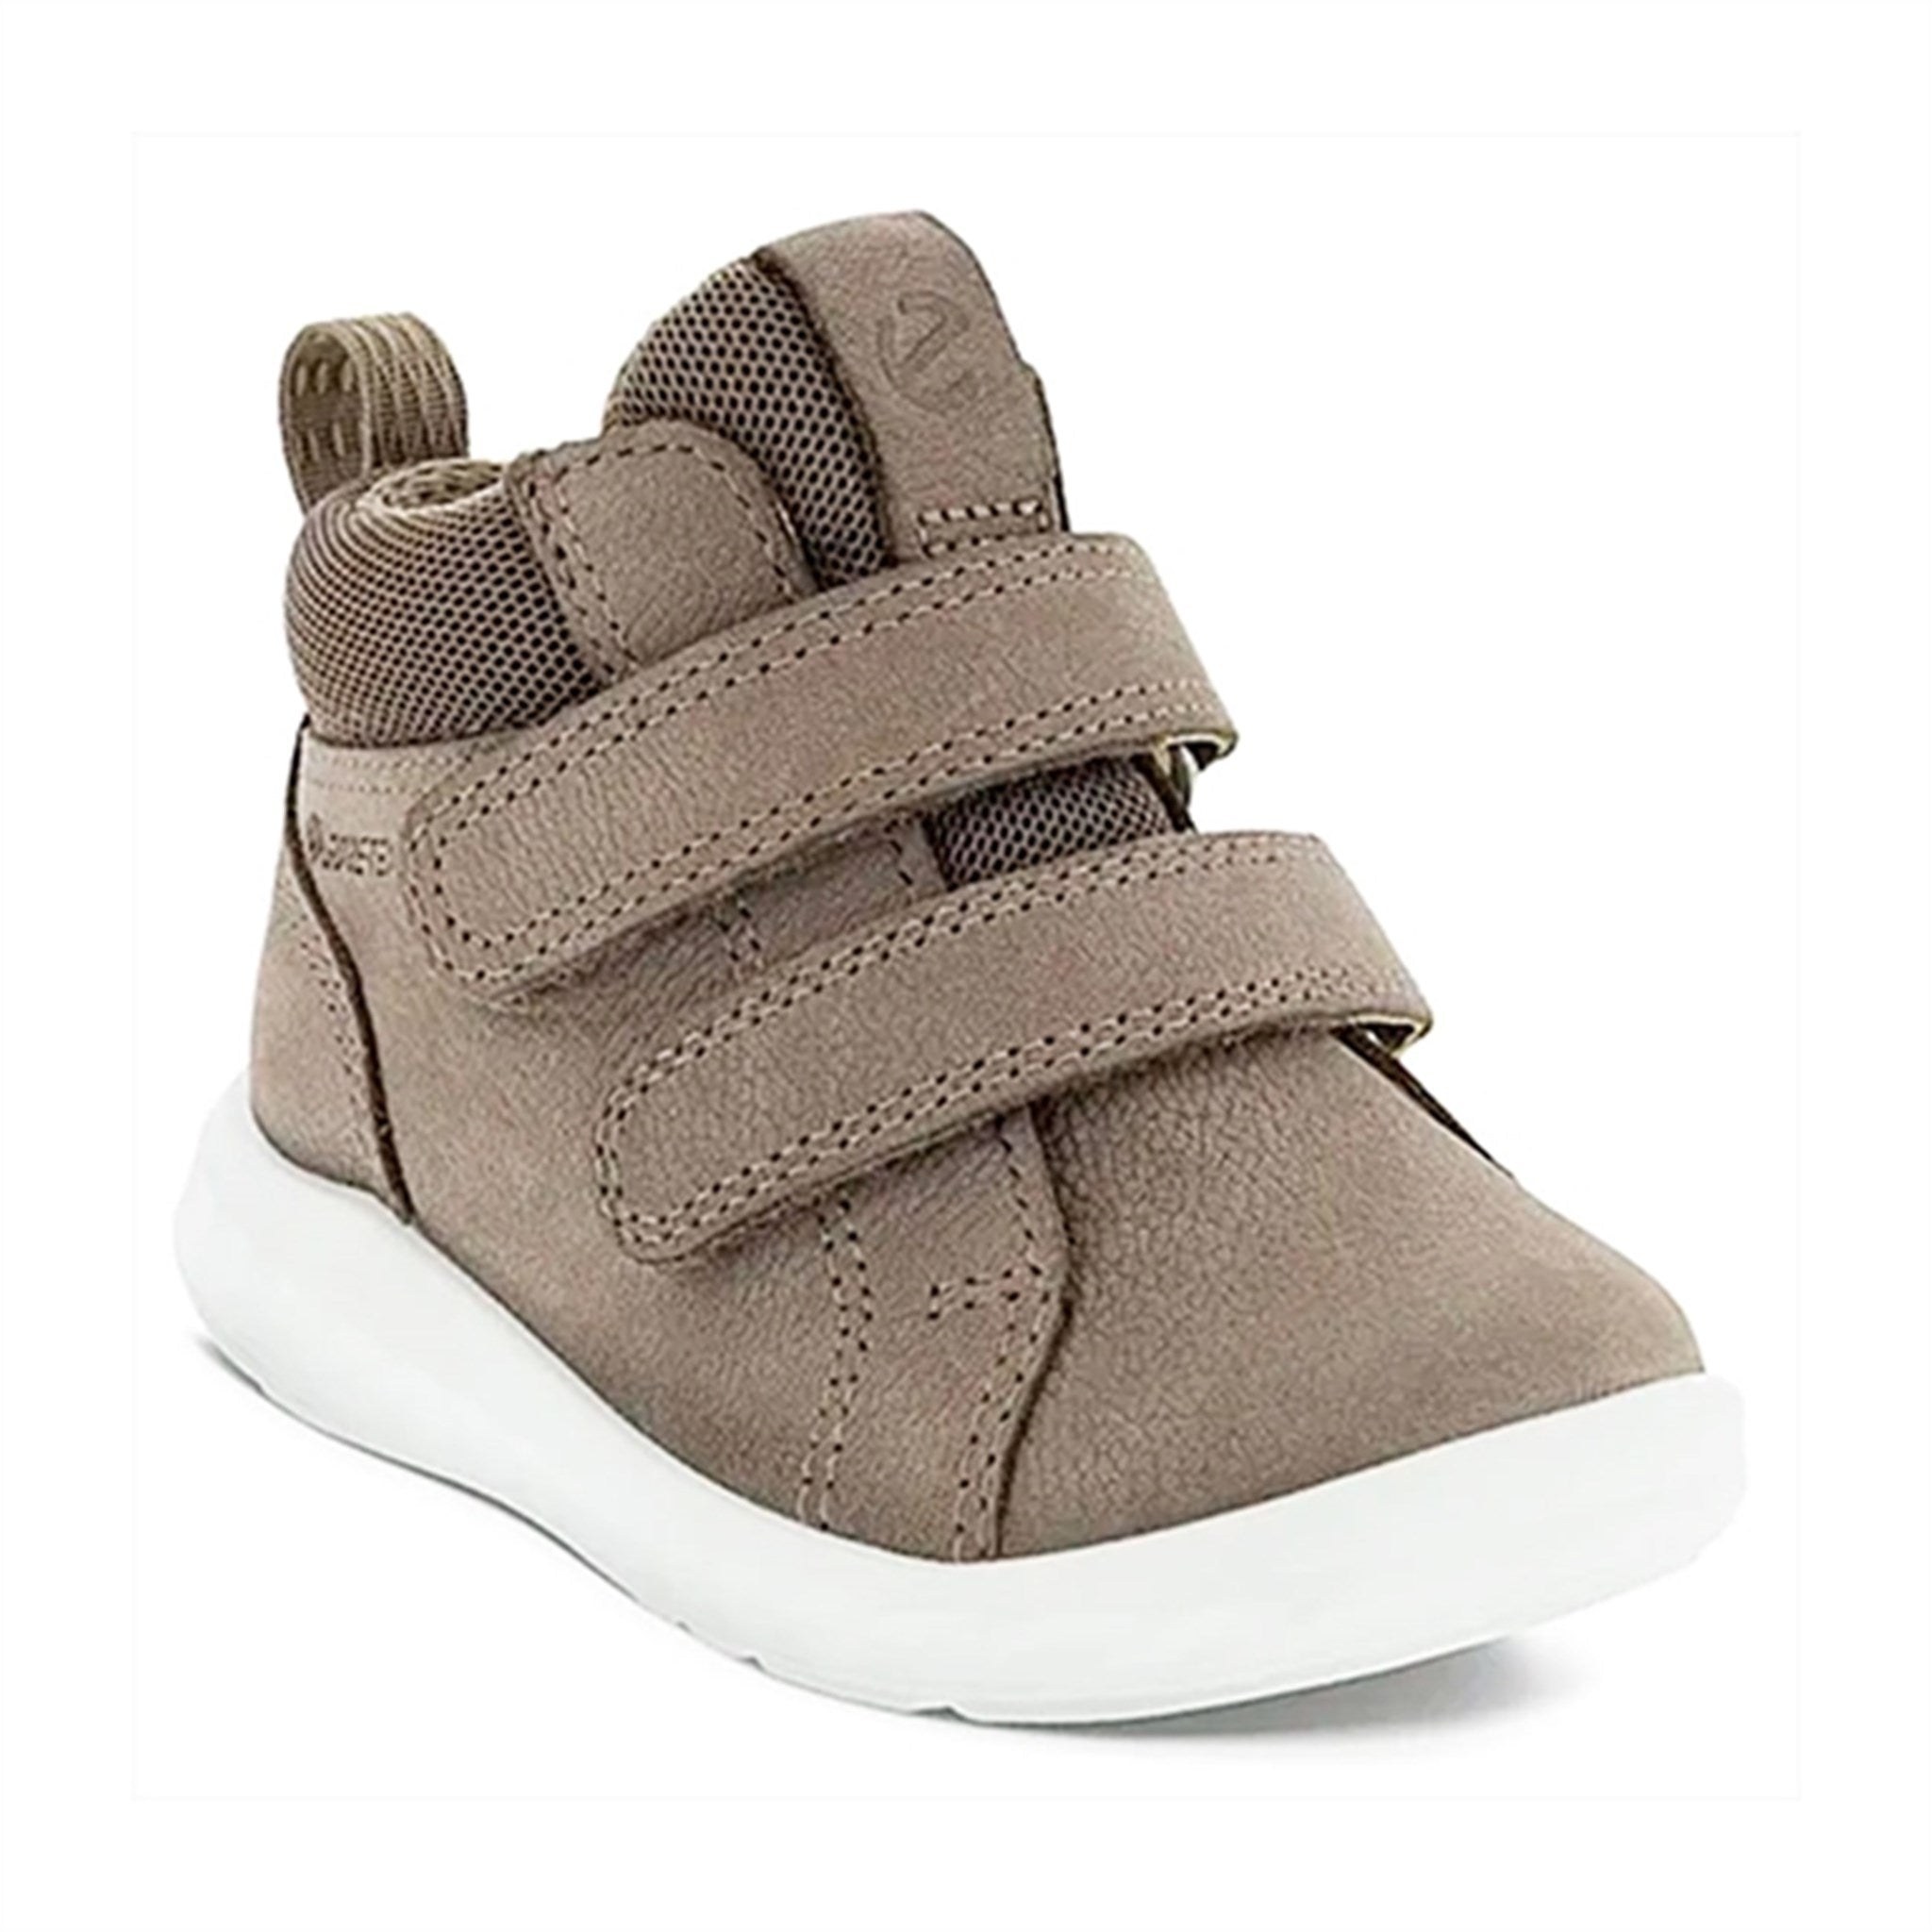 Ecco Lite Infant Ankle Bo Boot Taupe/Taupe